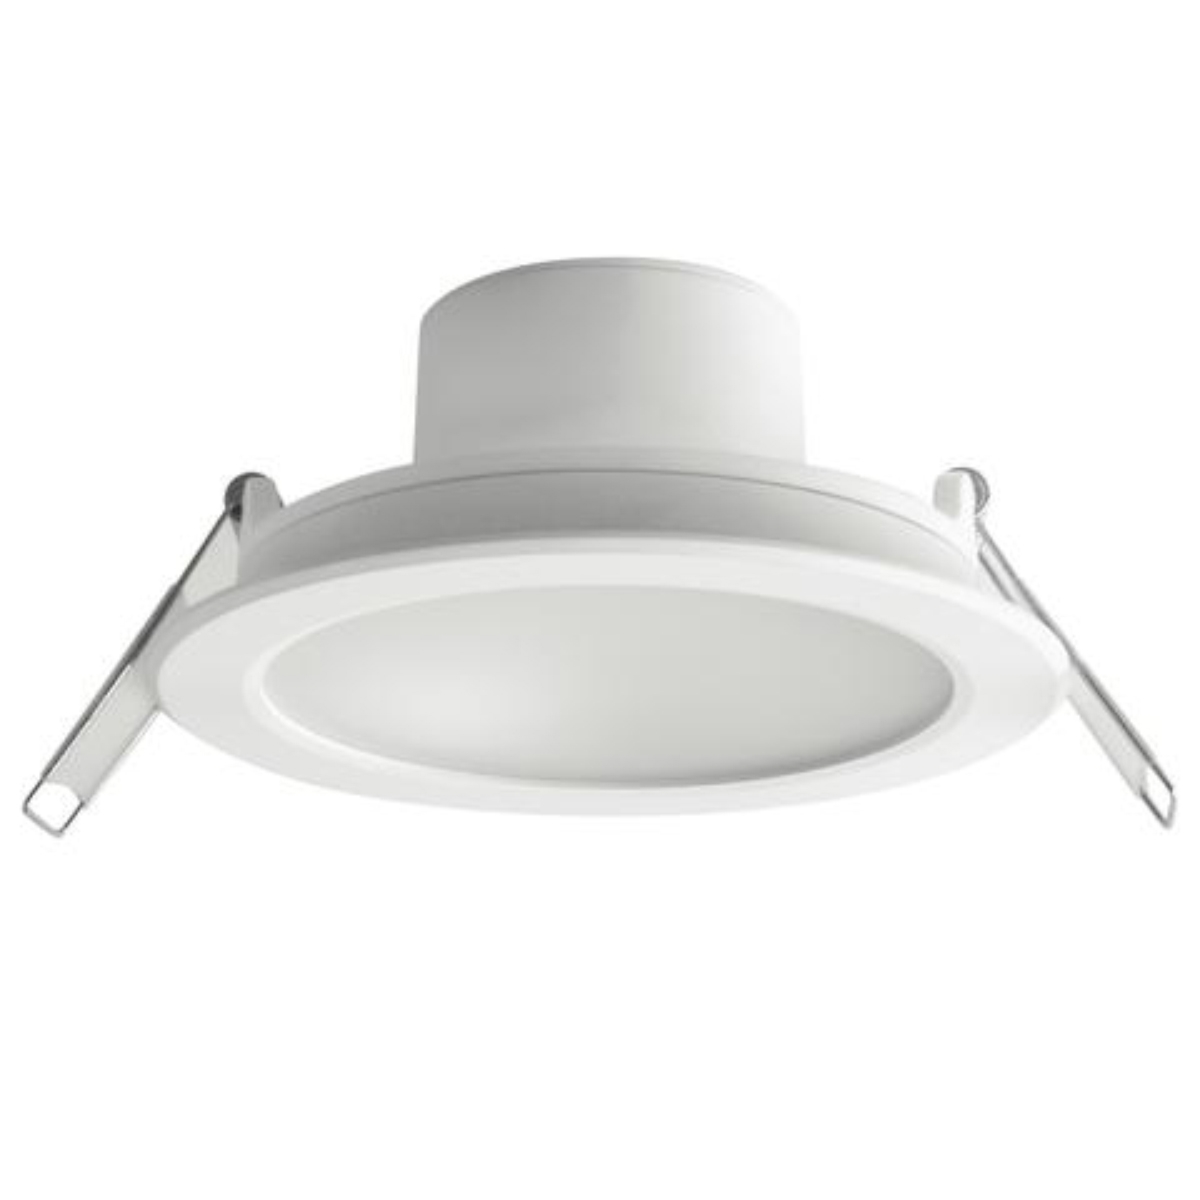 Megaman Sienalite Integrated LED Downlight F55400RC/WH26 8W 6500K - Day Light